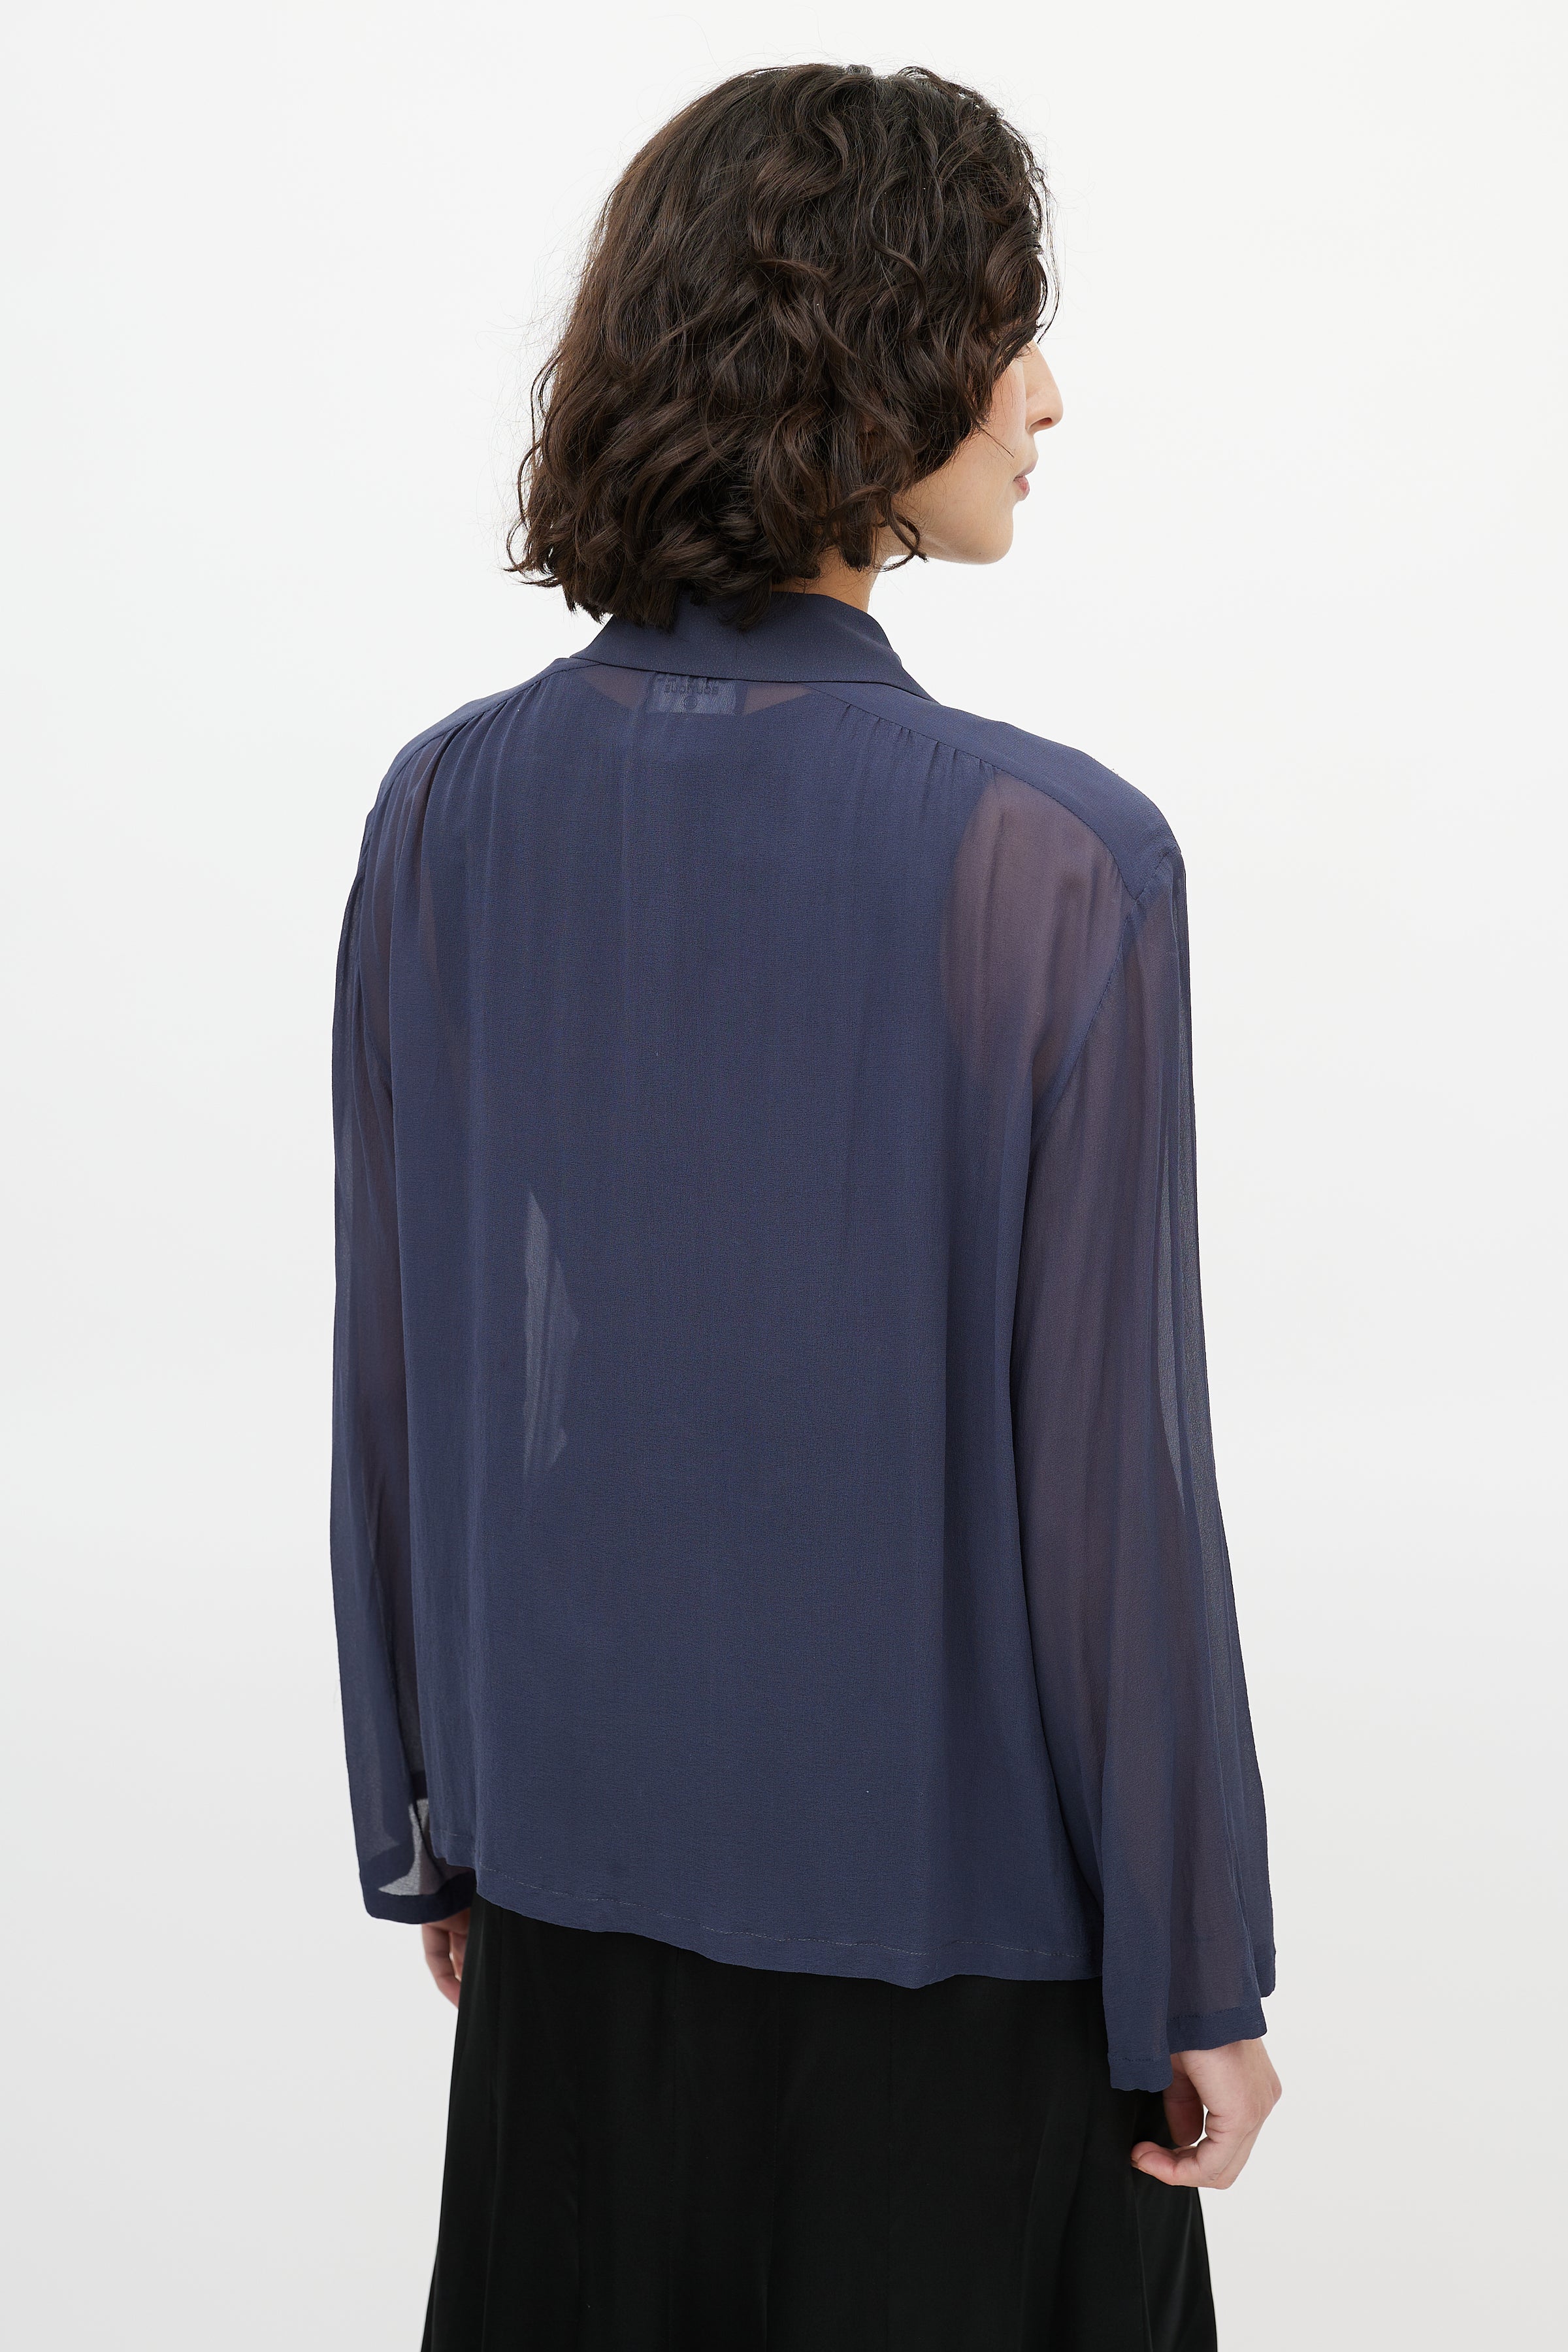 VSP – Chanel Sheer Blouse // Scarf Navy Consignment